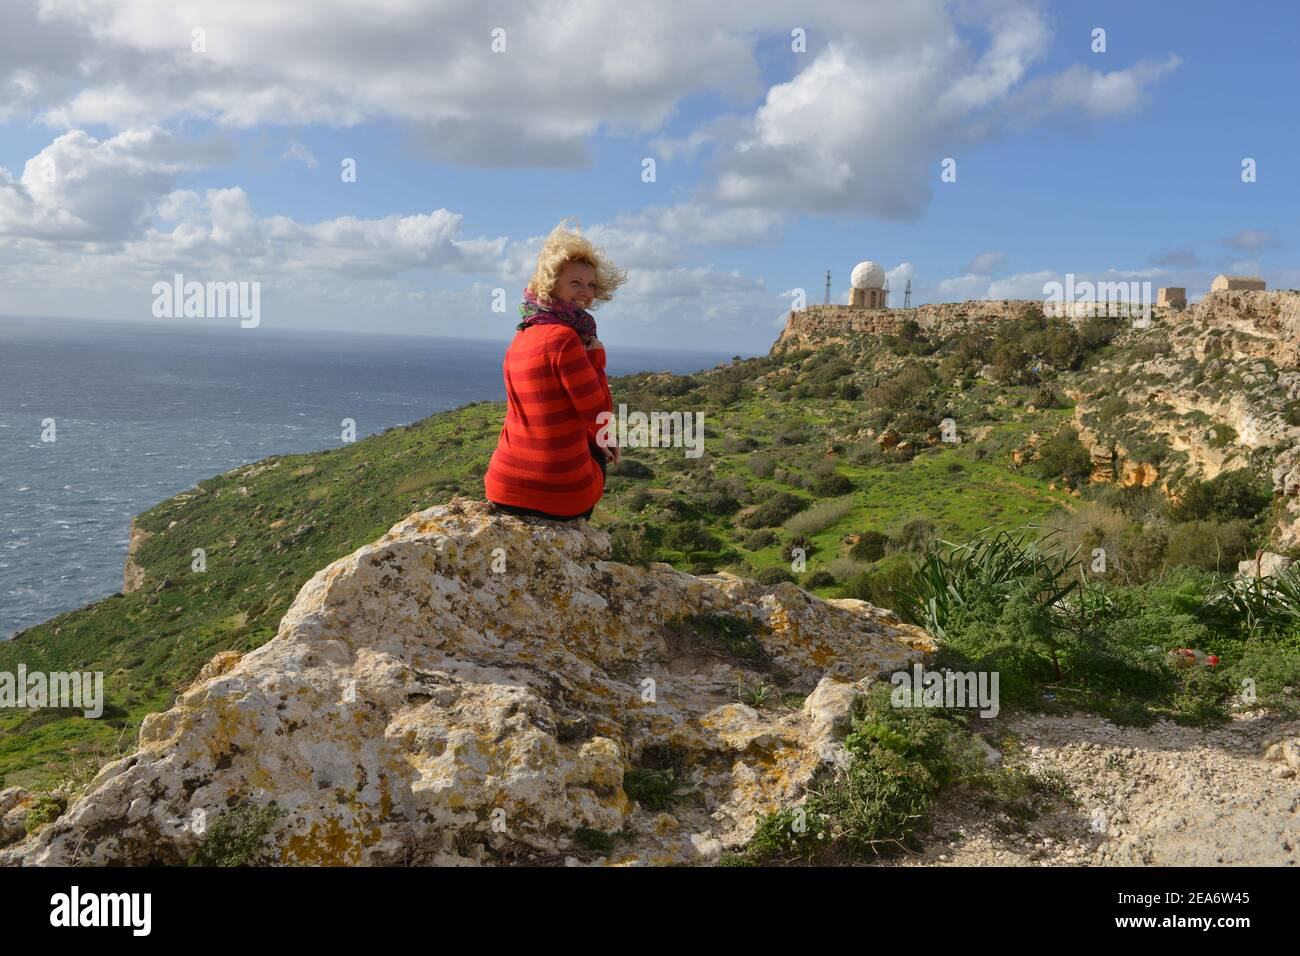 Rear view of a woman sitting on a rock looking at Dingli cliffs with Dingli Radar Station in the distance, Malta Stock Photo